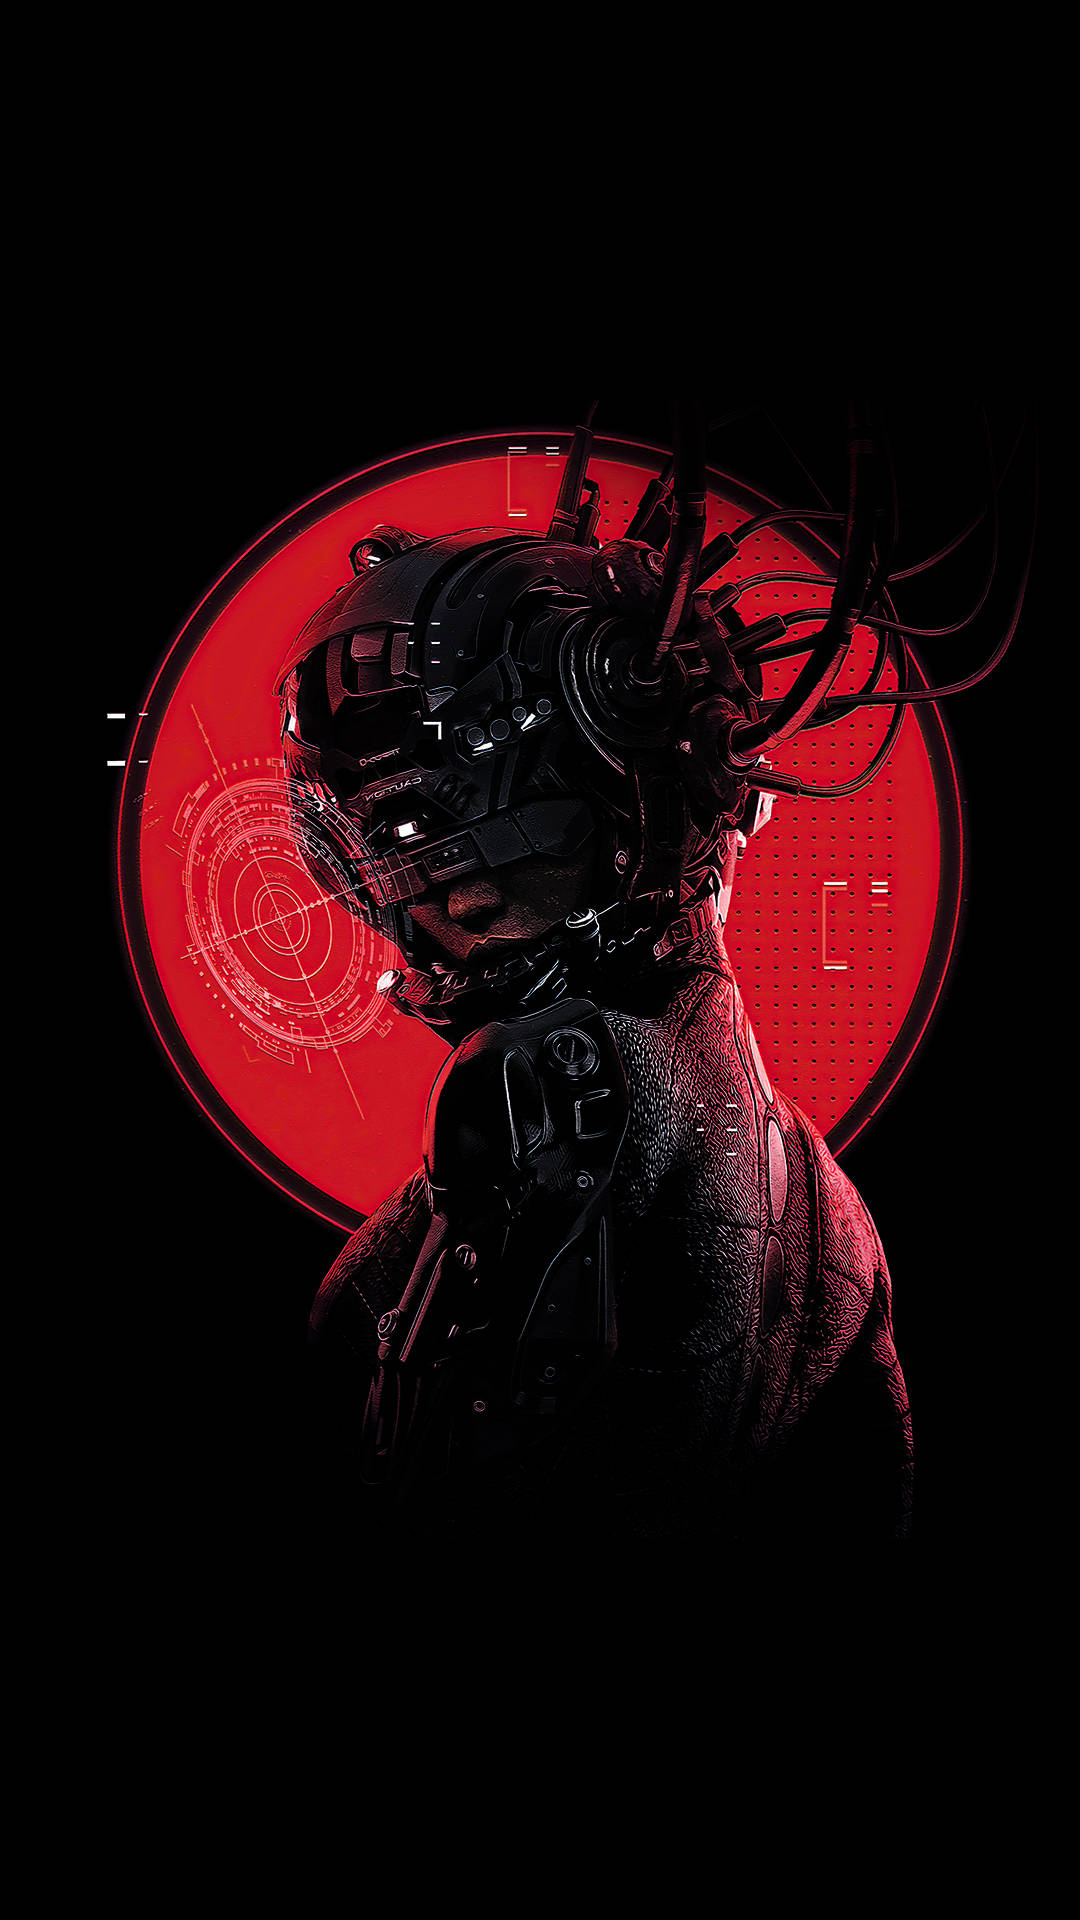 A Black And Red Image Of A Man With A Head Full Of Wires